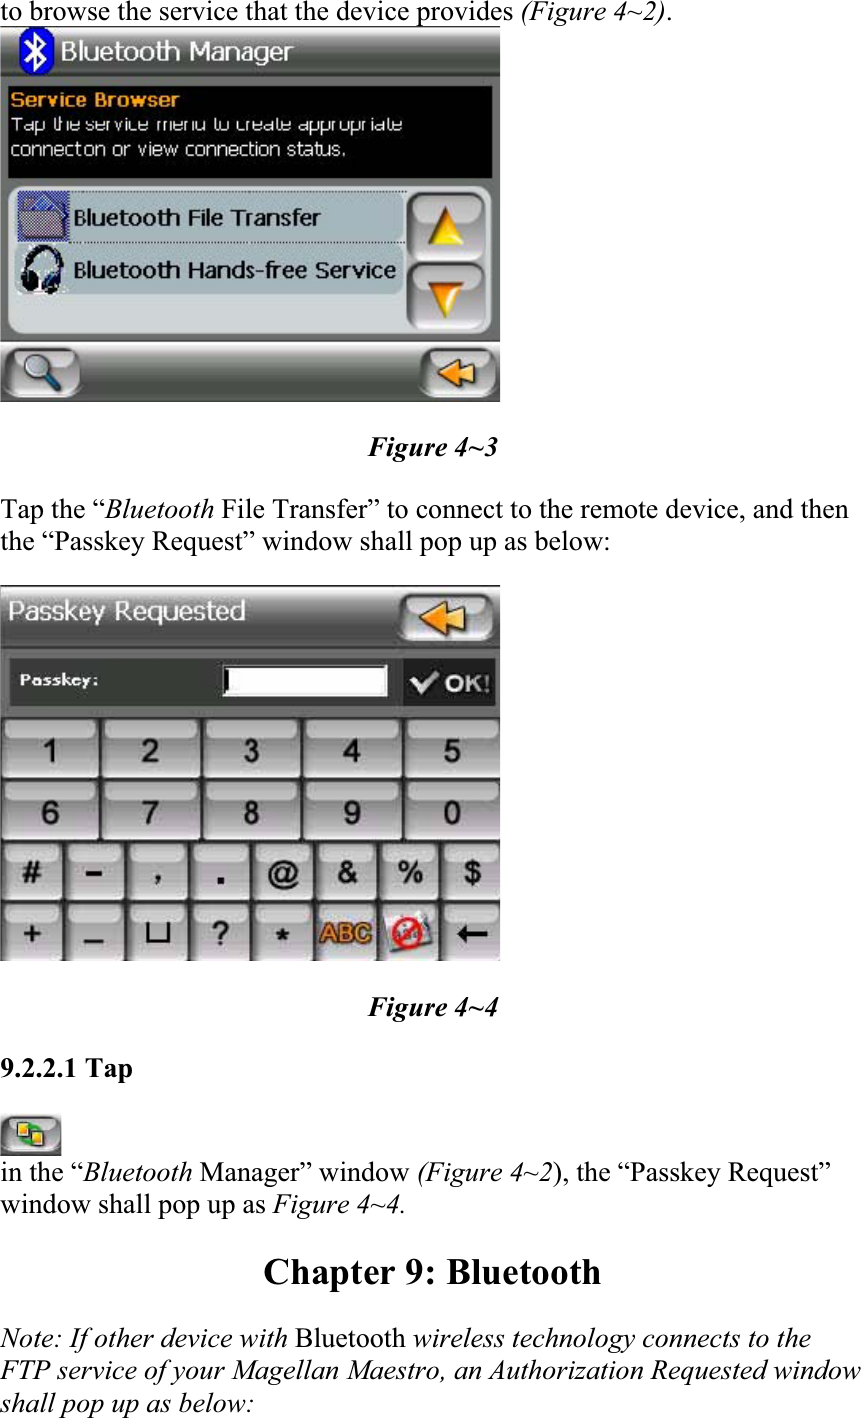 to browse the service that the device provides (Figure 4~2).Figure 4~3 Tap the “Bluetooth File Transfer” to connect to the remote device, and then the “Passkey Request” window shall pop up as below:  Figure 4~4 9.2.2.1 Tapin the “Bluetooth Manager” window (Figure 4~2), the “Passkey Request” window shall pop up as Figure 4~4. Chapter 9: Bluetooth Note: If other device with Bluetooth wireless technology connects to the FTP service of your Magellan Maestro, an Authorization Requested window shall pop up as below: 